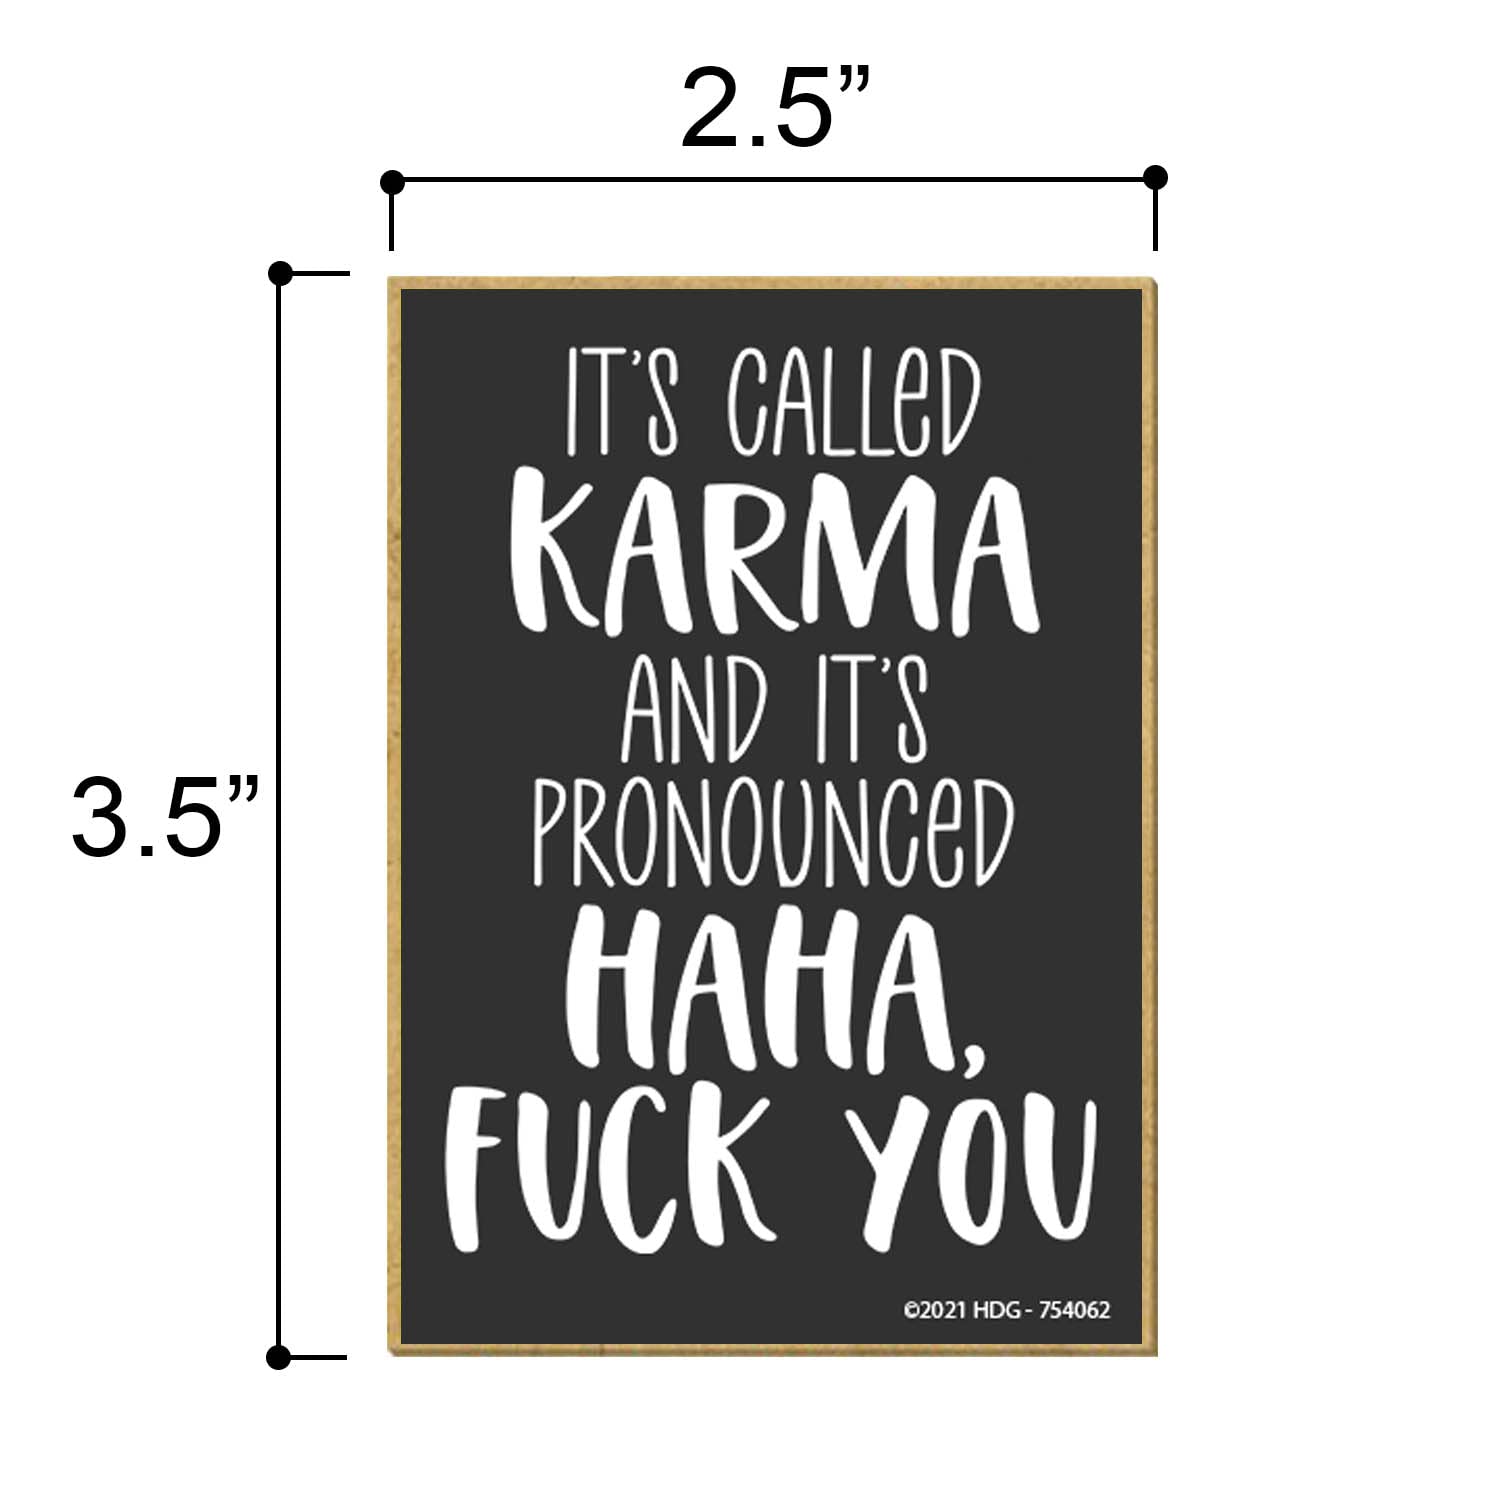 Honey Dew Gifts, It's Called Karma and It's Pronounced Haha, Fuck You, 2.5 Inches by 3.5 Inches, Made In USA, Refrigerator Magnets, Decorative Magnets, Funny Magnets, Inappropriate Gifts, Funny Fridge